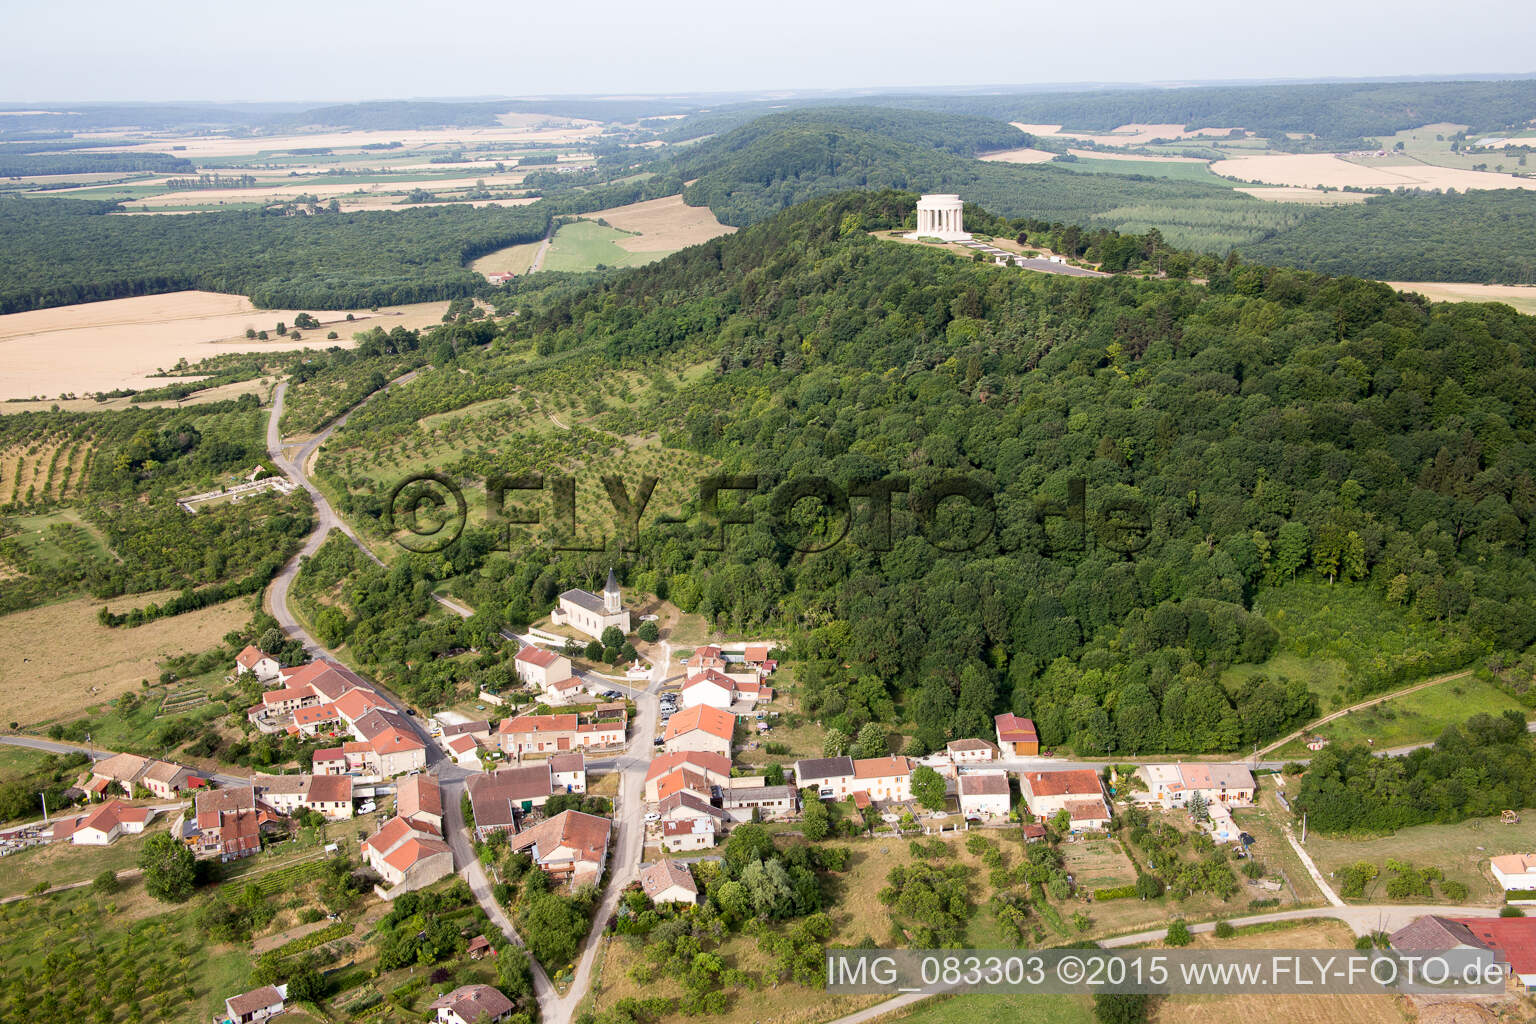 Aerial photograpy of American War Memorial in Montsec in the state Meuse, France